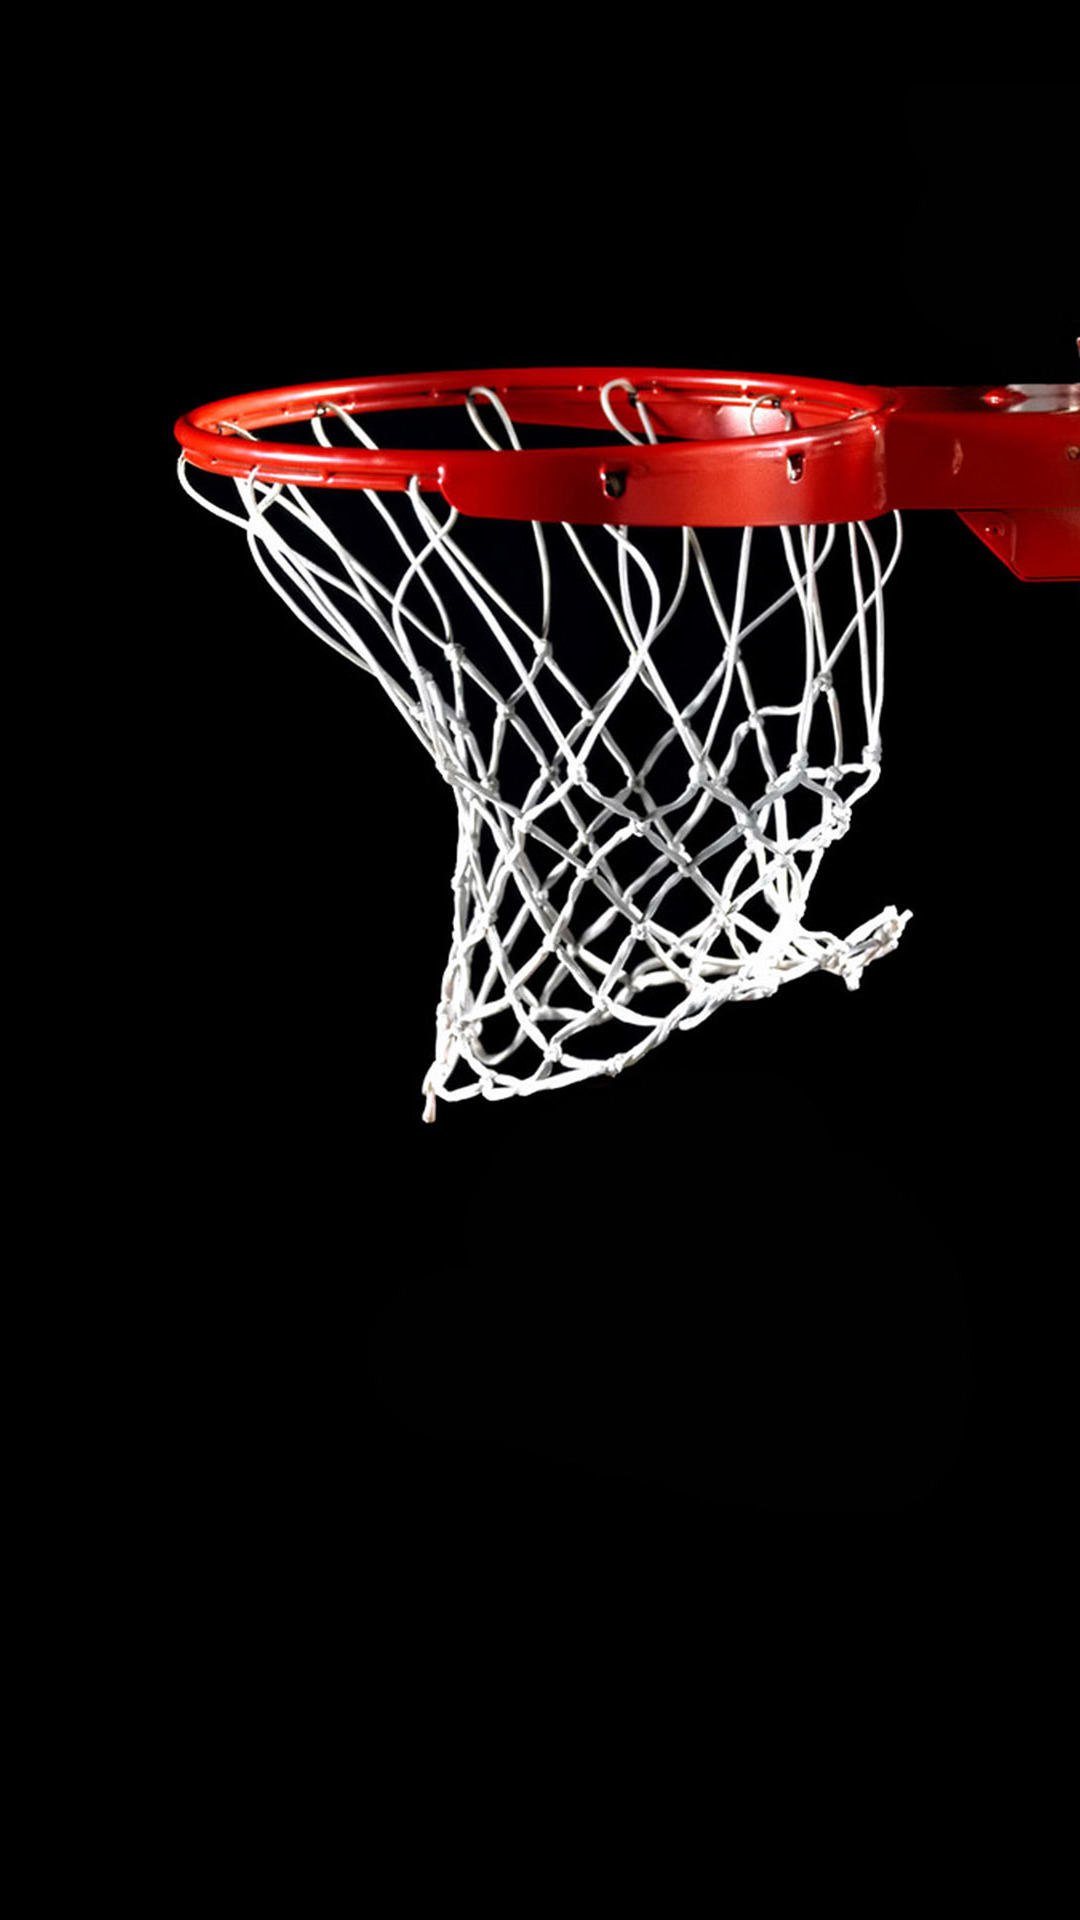 Girl Playing Basketball iPhone Wallpaper  iPhone Wallpapers